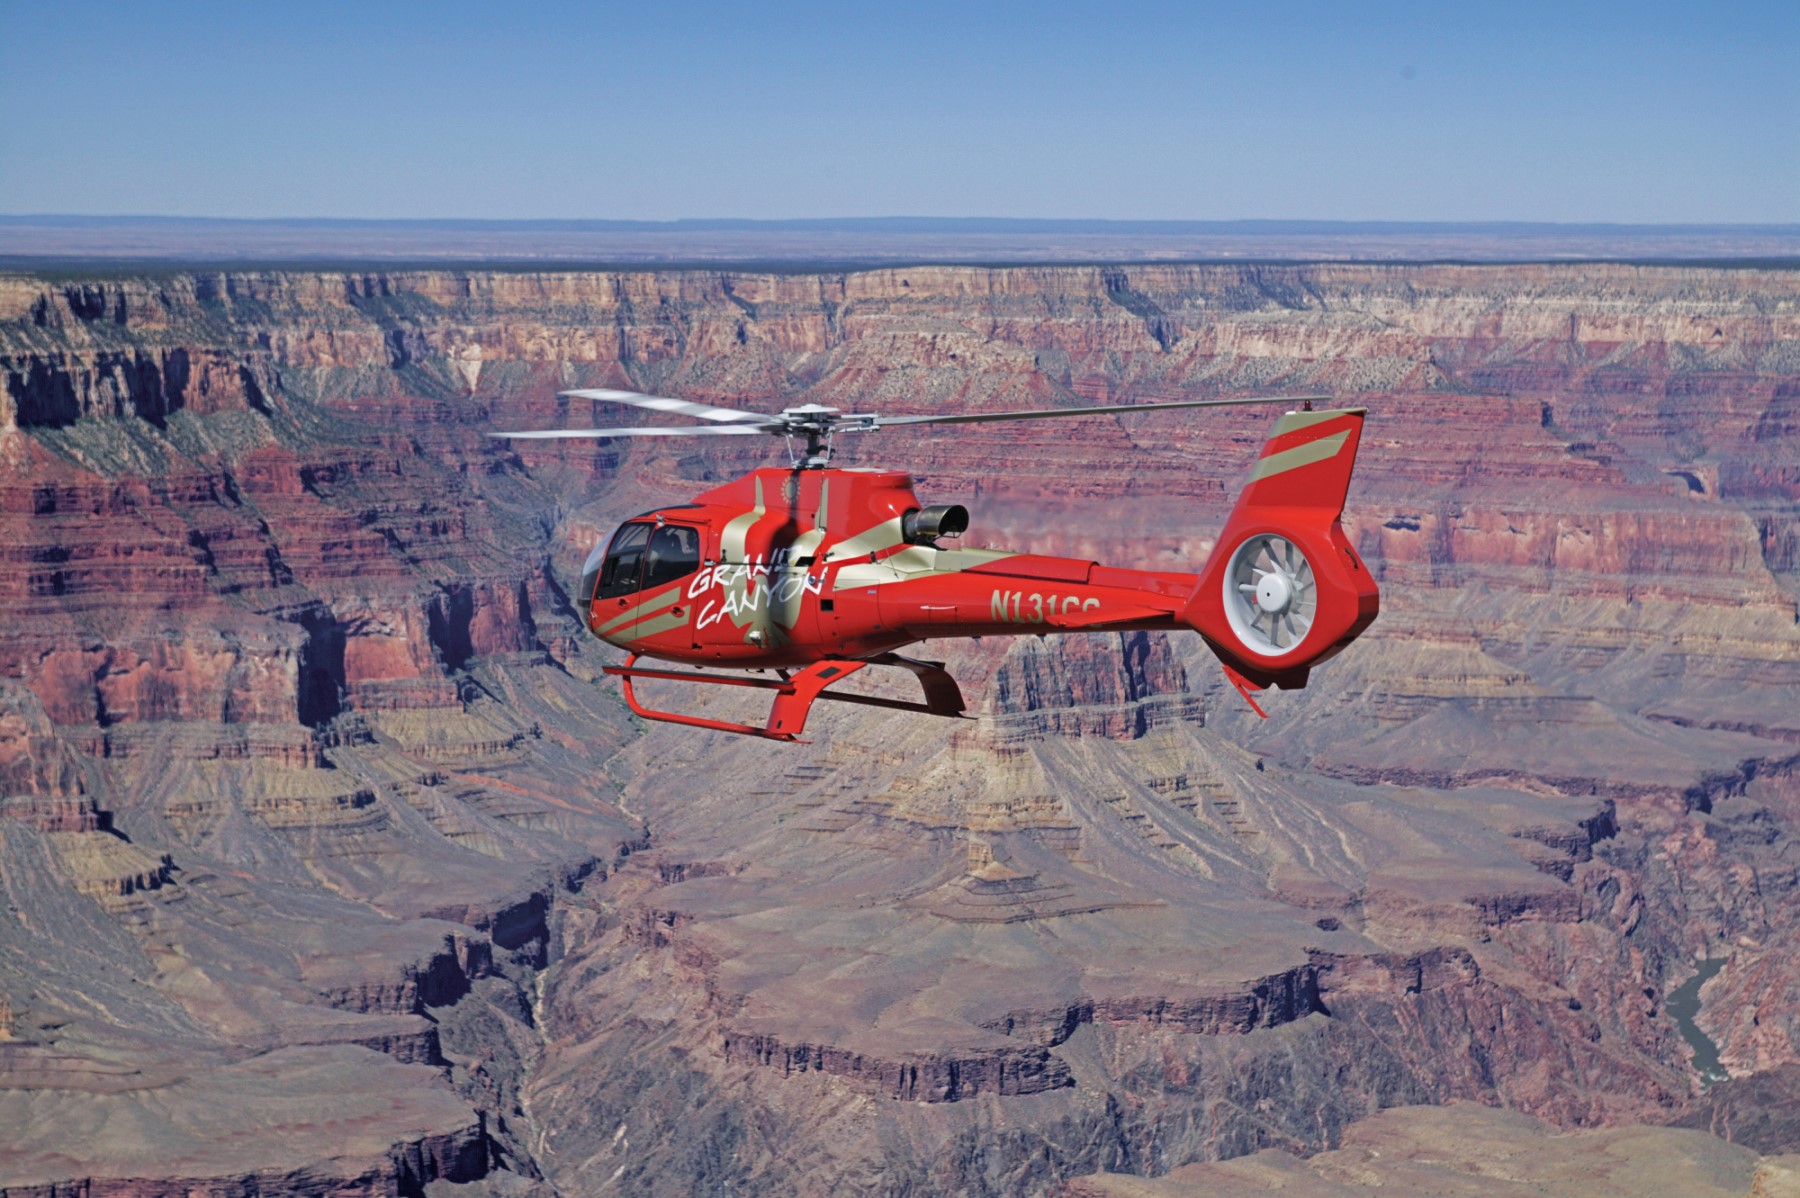 helicopter tour over Grand Canyon